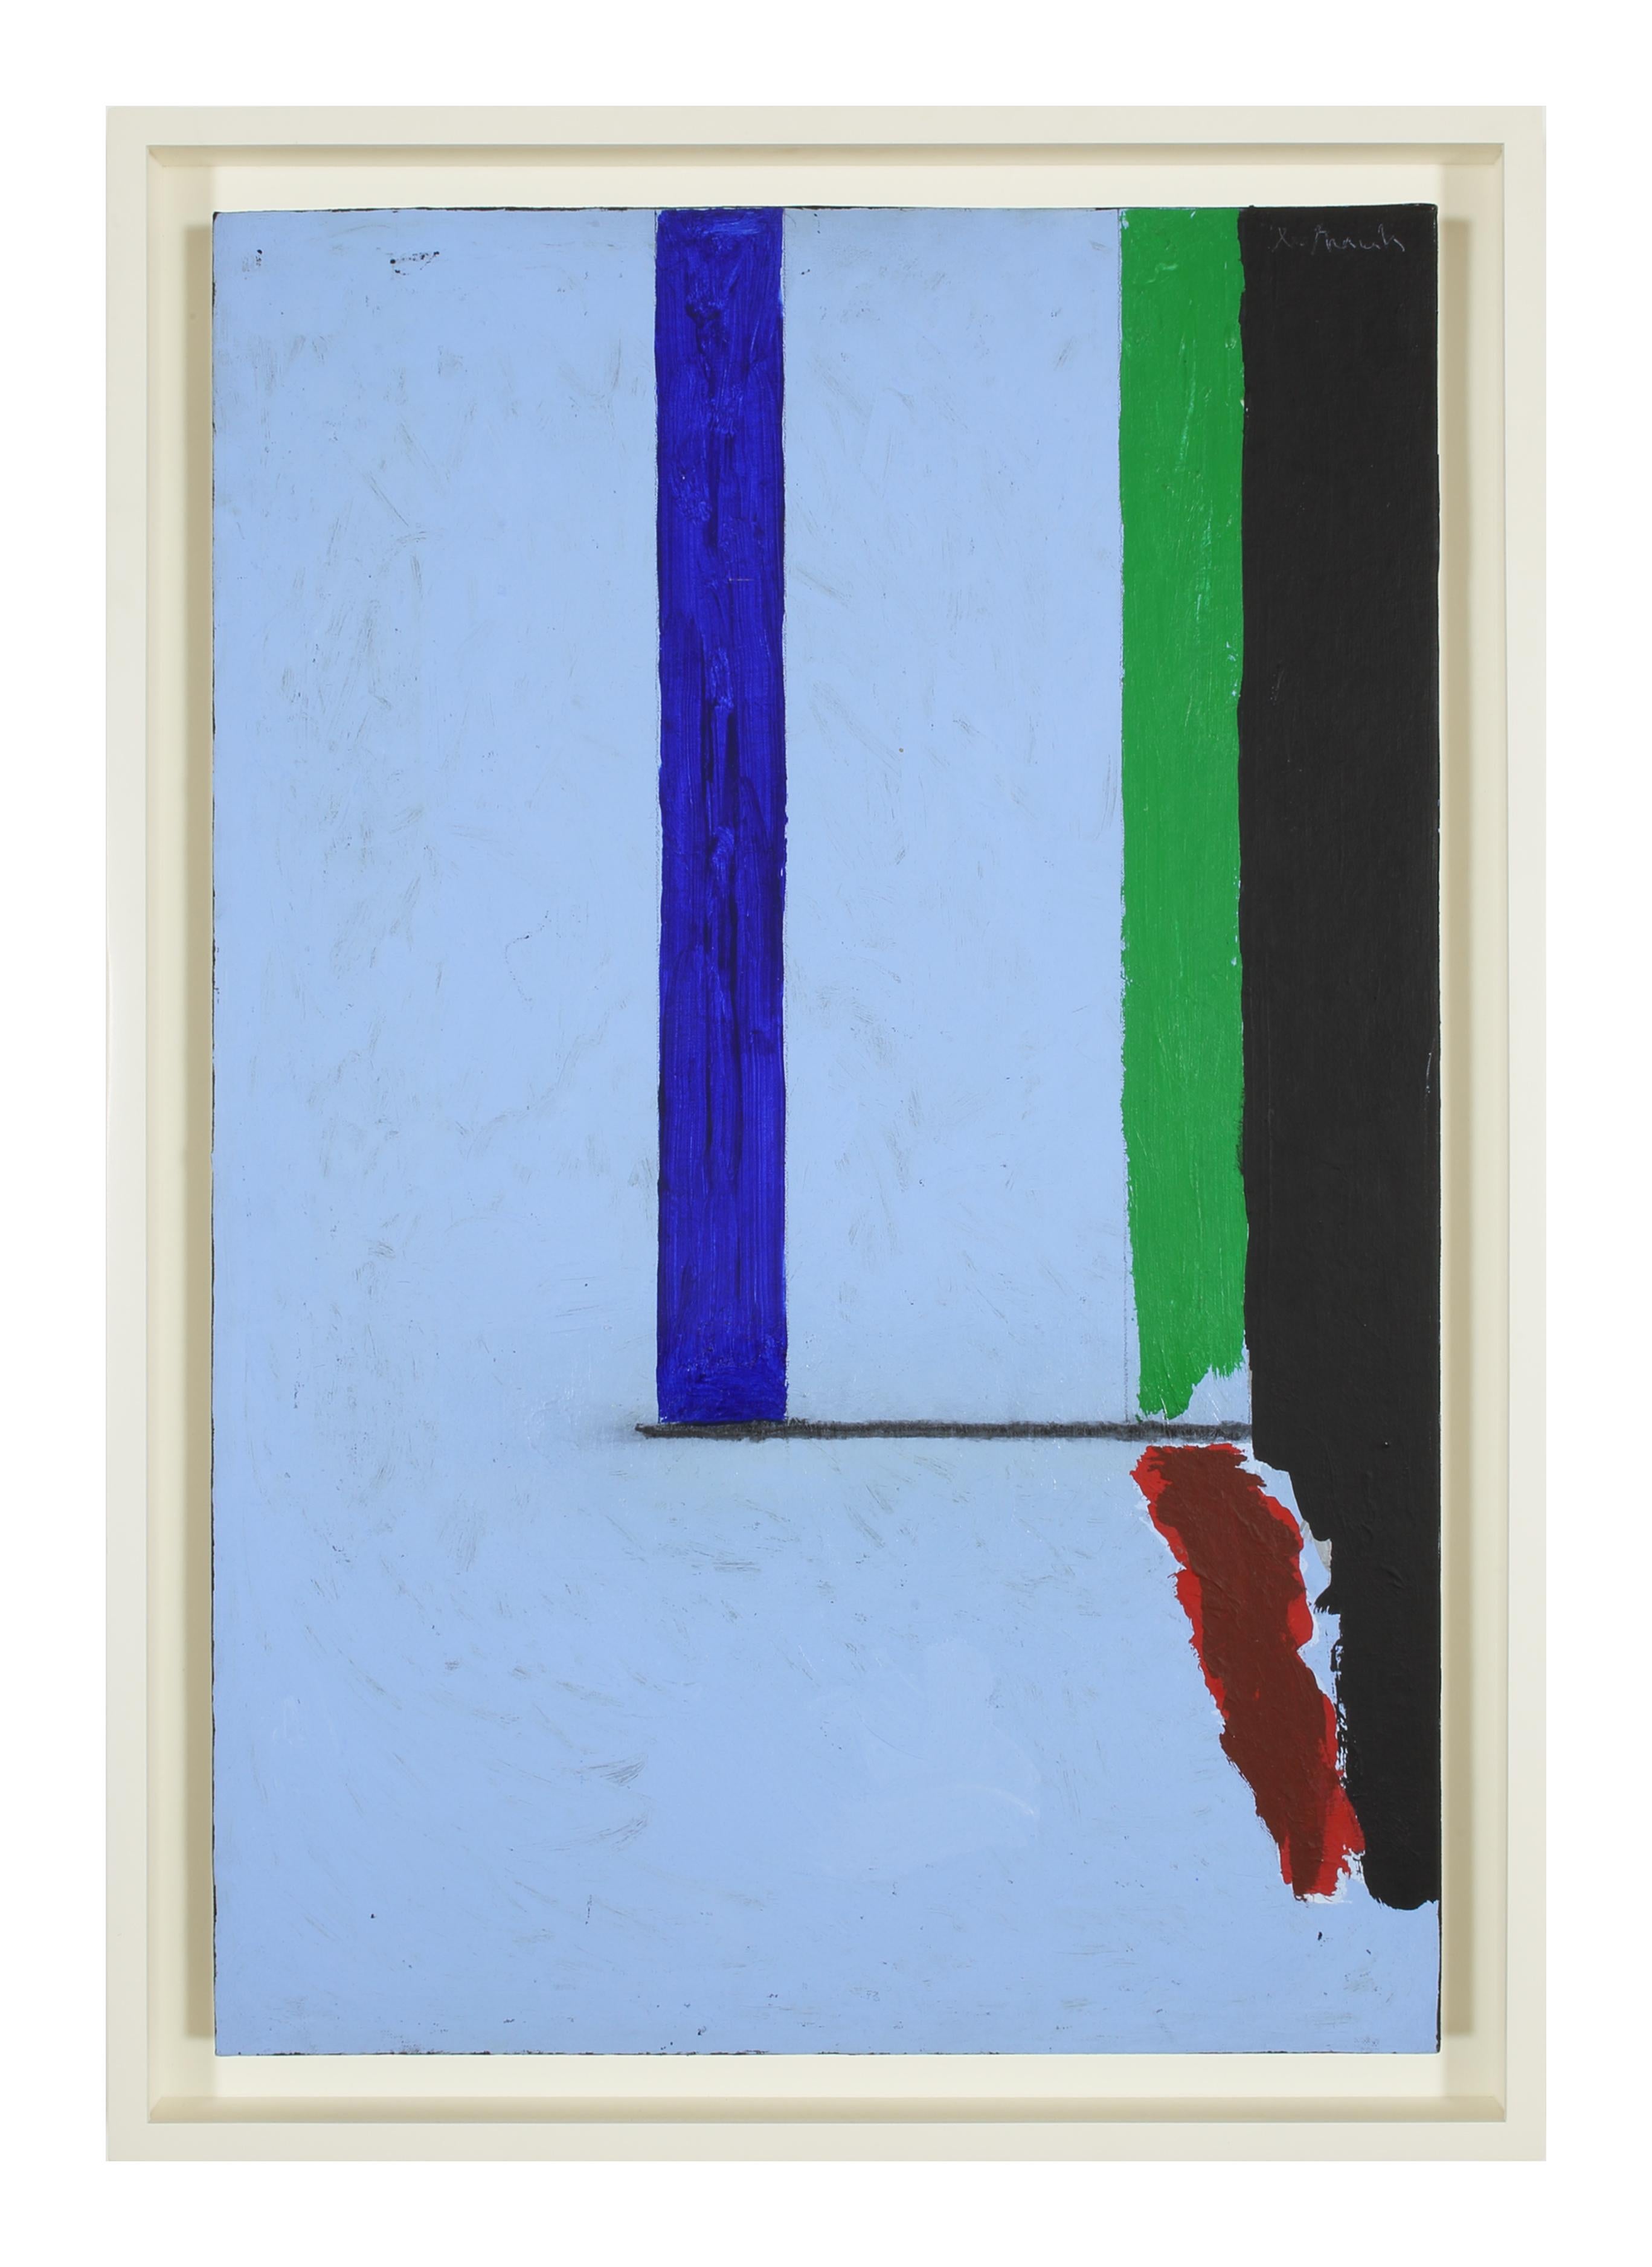 Open #125: Jeannie - Abstract Expressionist Painting by Robert Motherwell